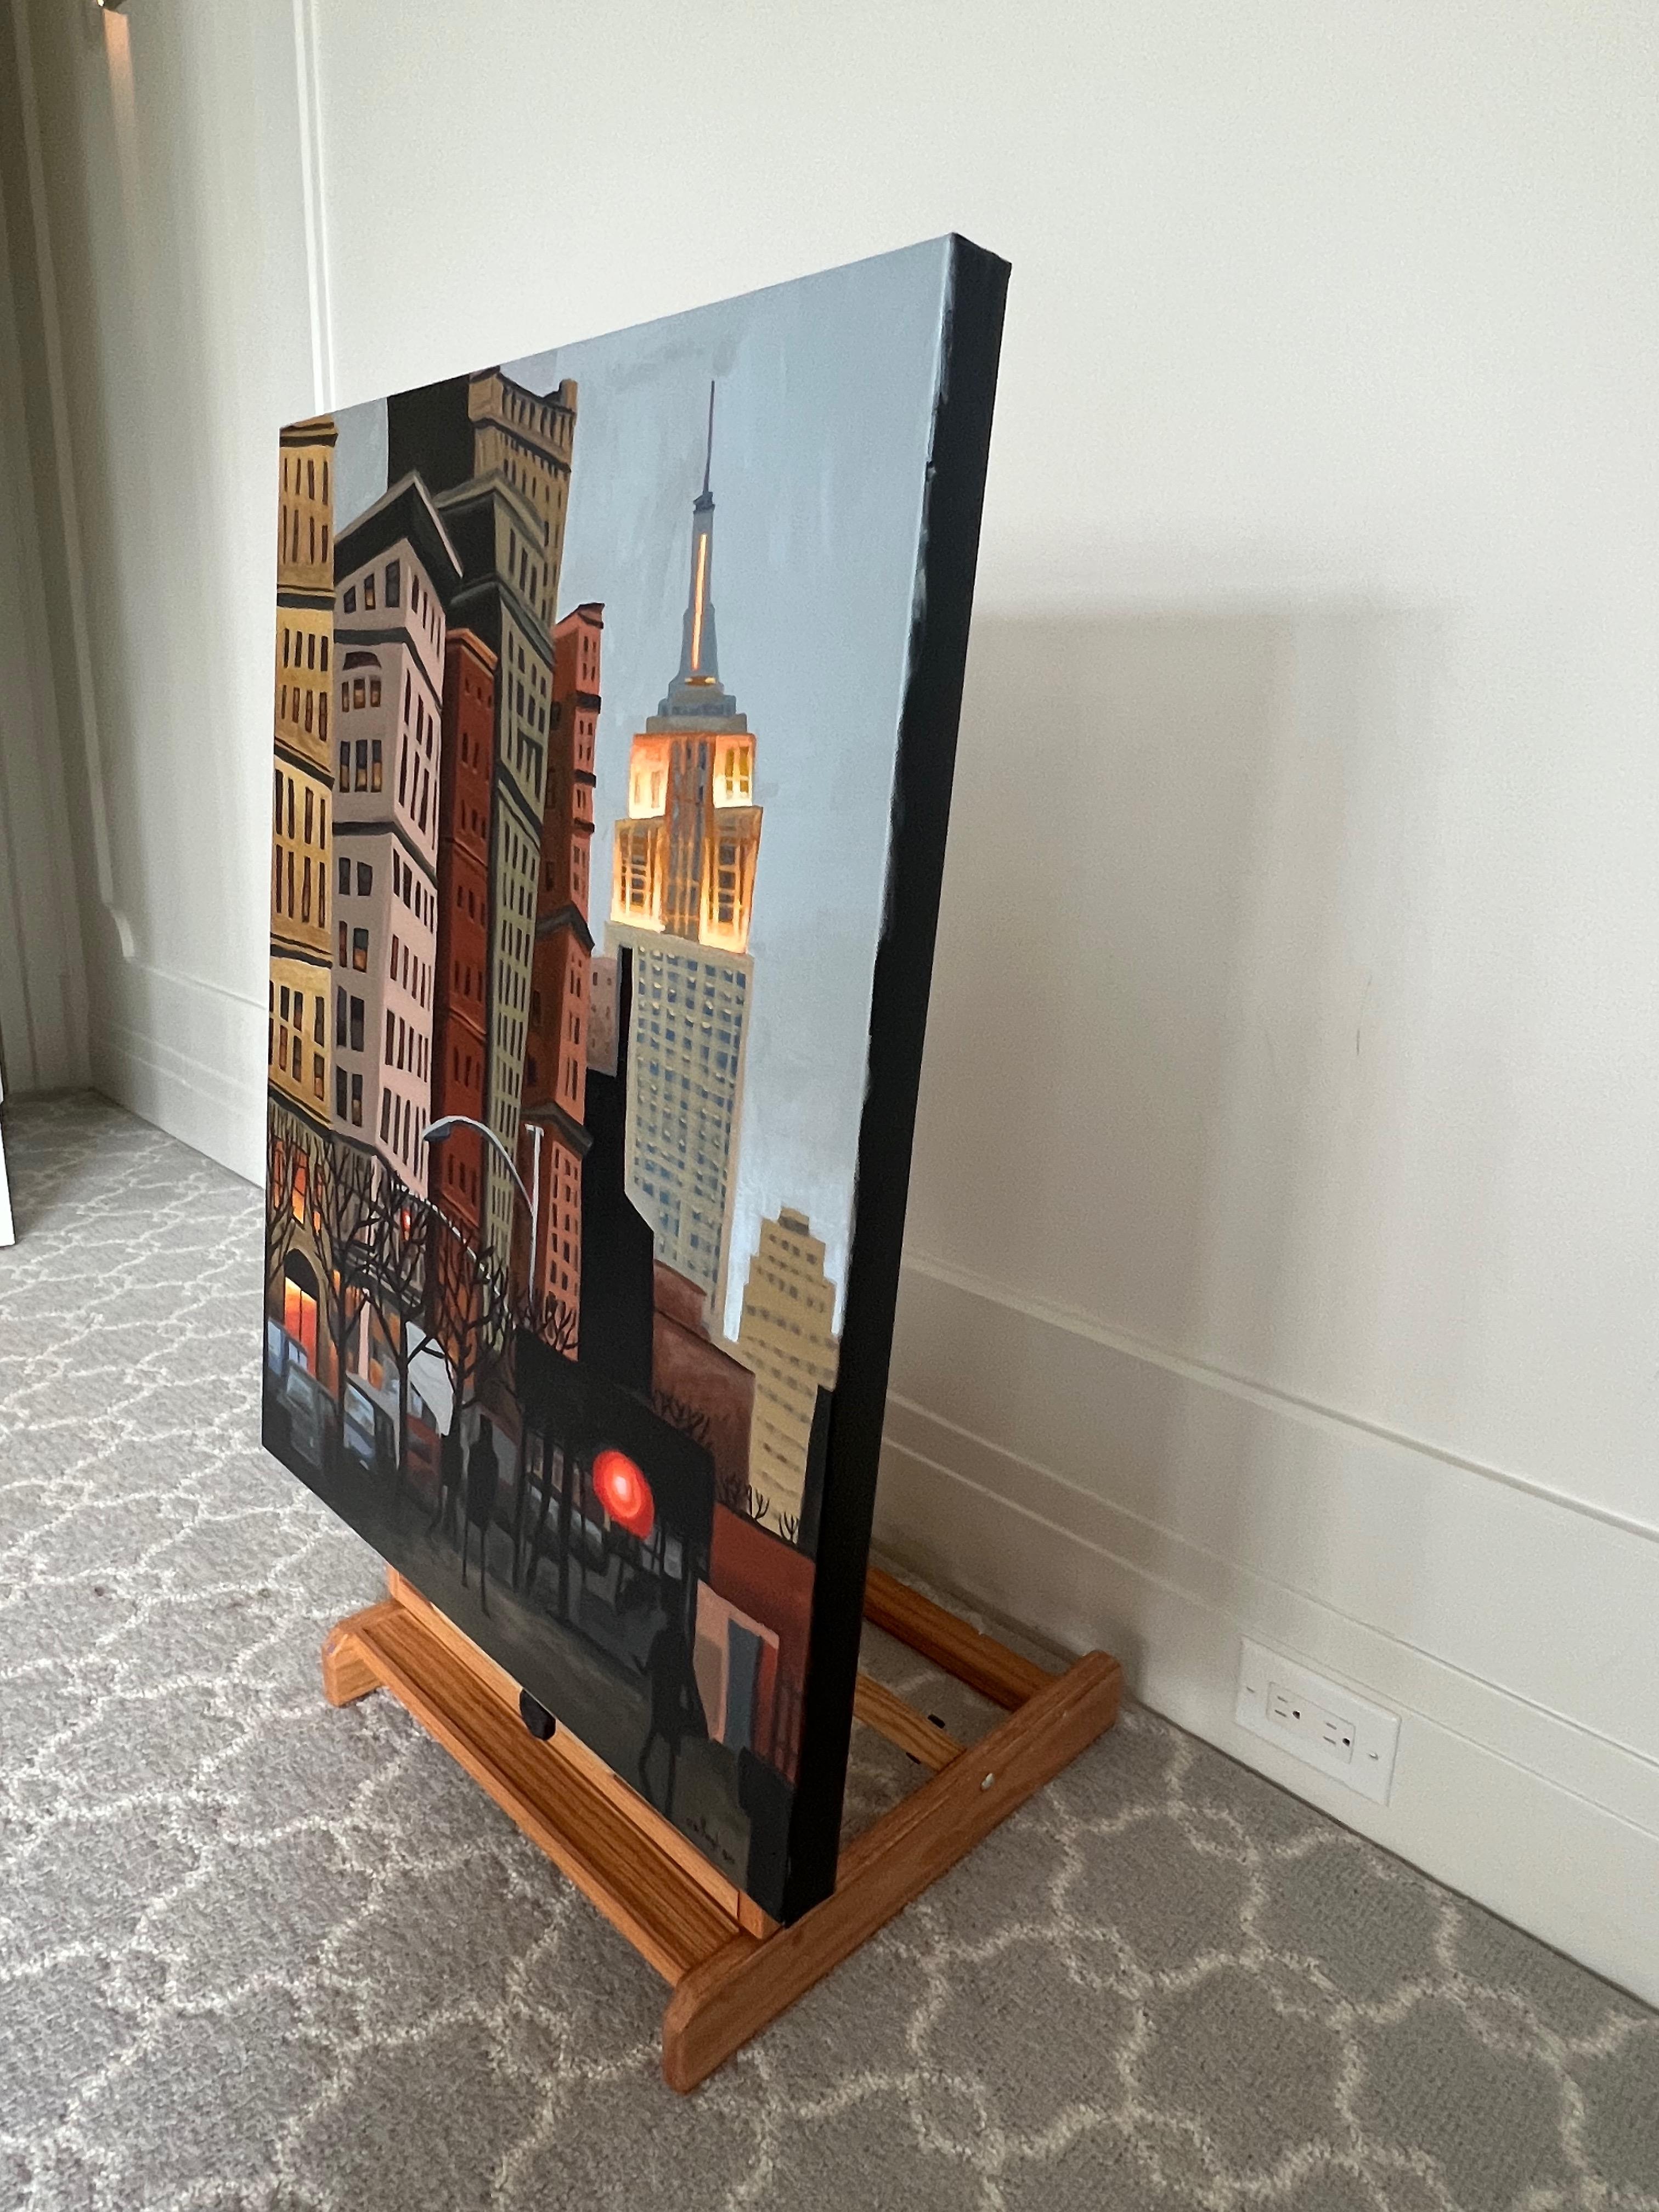 Street Scene & Empire State Building, Original Painting - Black Landscape Painting by Brian Callaghan